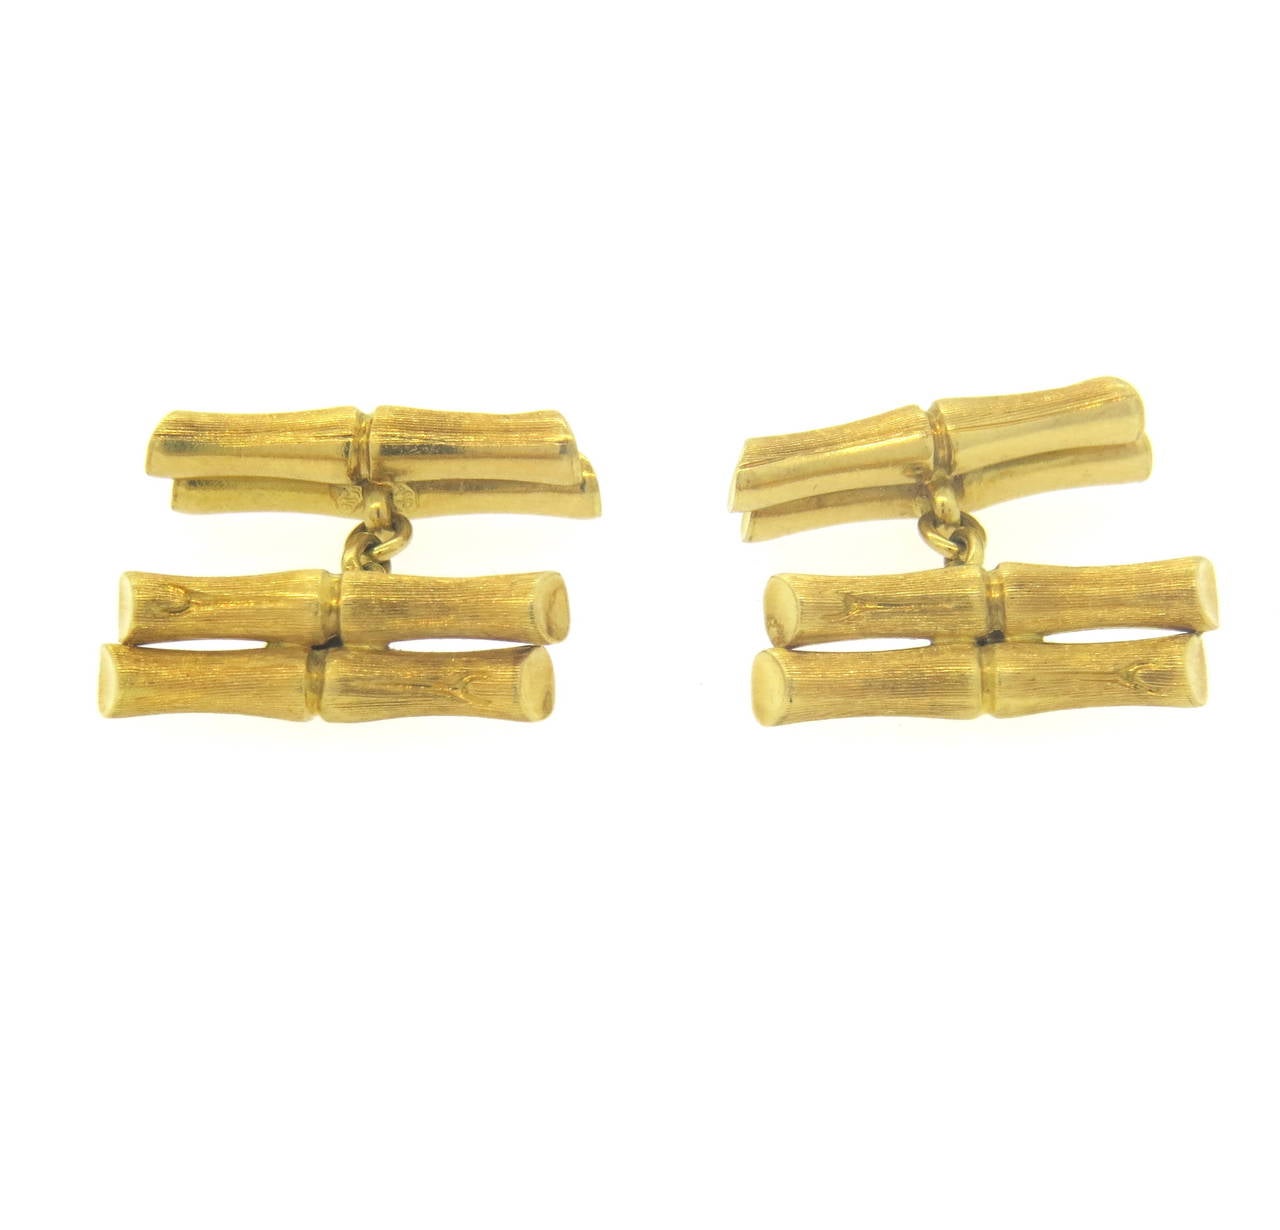 18k brushed gold cufflinks, featuring bamboo design. Each top measures 24mm x 7mm. Weight - 13.1 grams